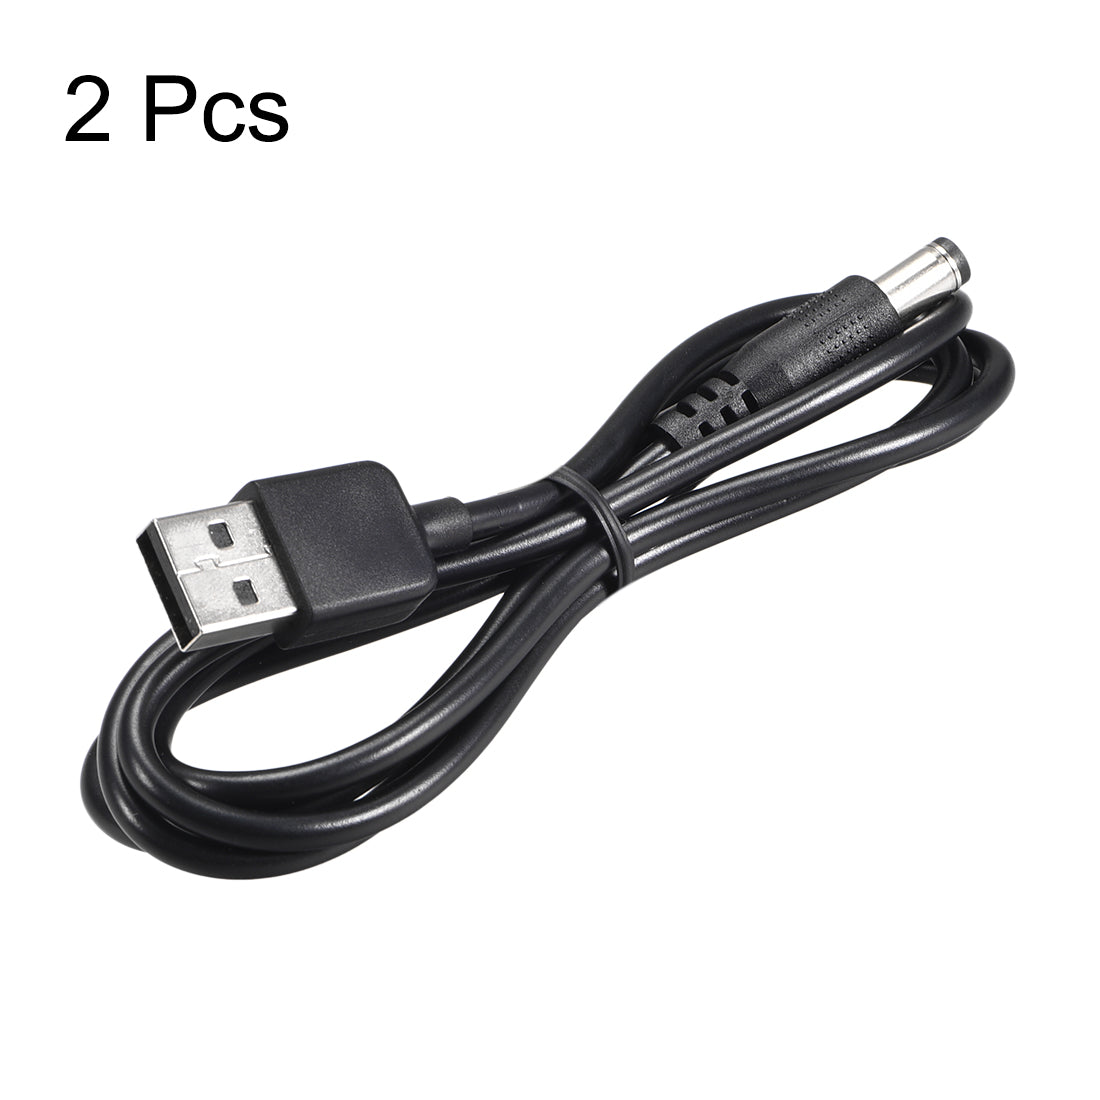 uxcell Uxcell 2Pcs USB 2.0 a Type Male to DC5V Power Plugs Barrel Connector Charge Cable Black